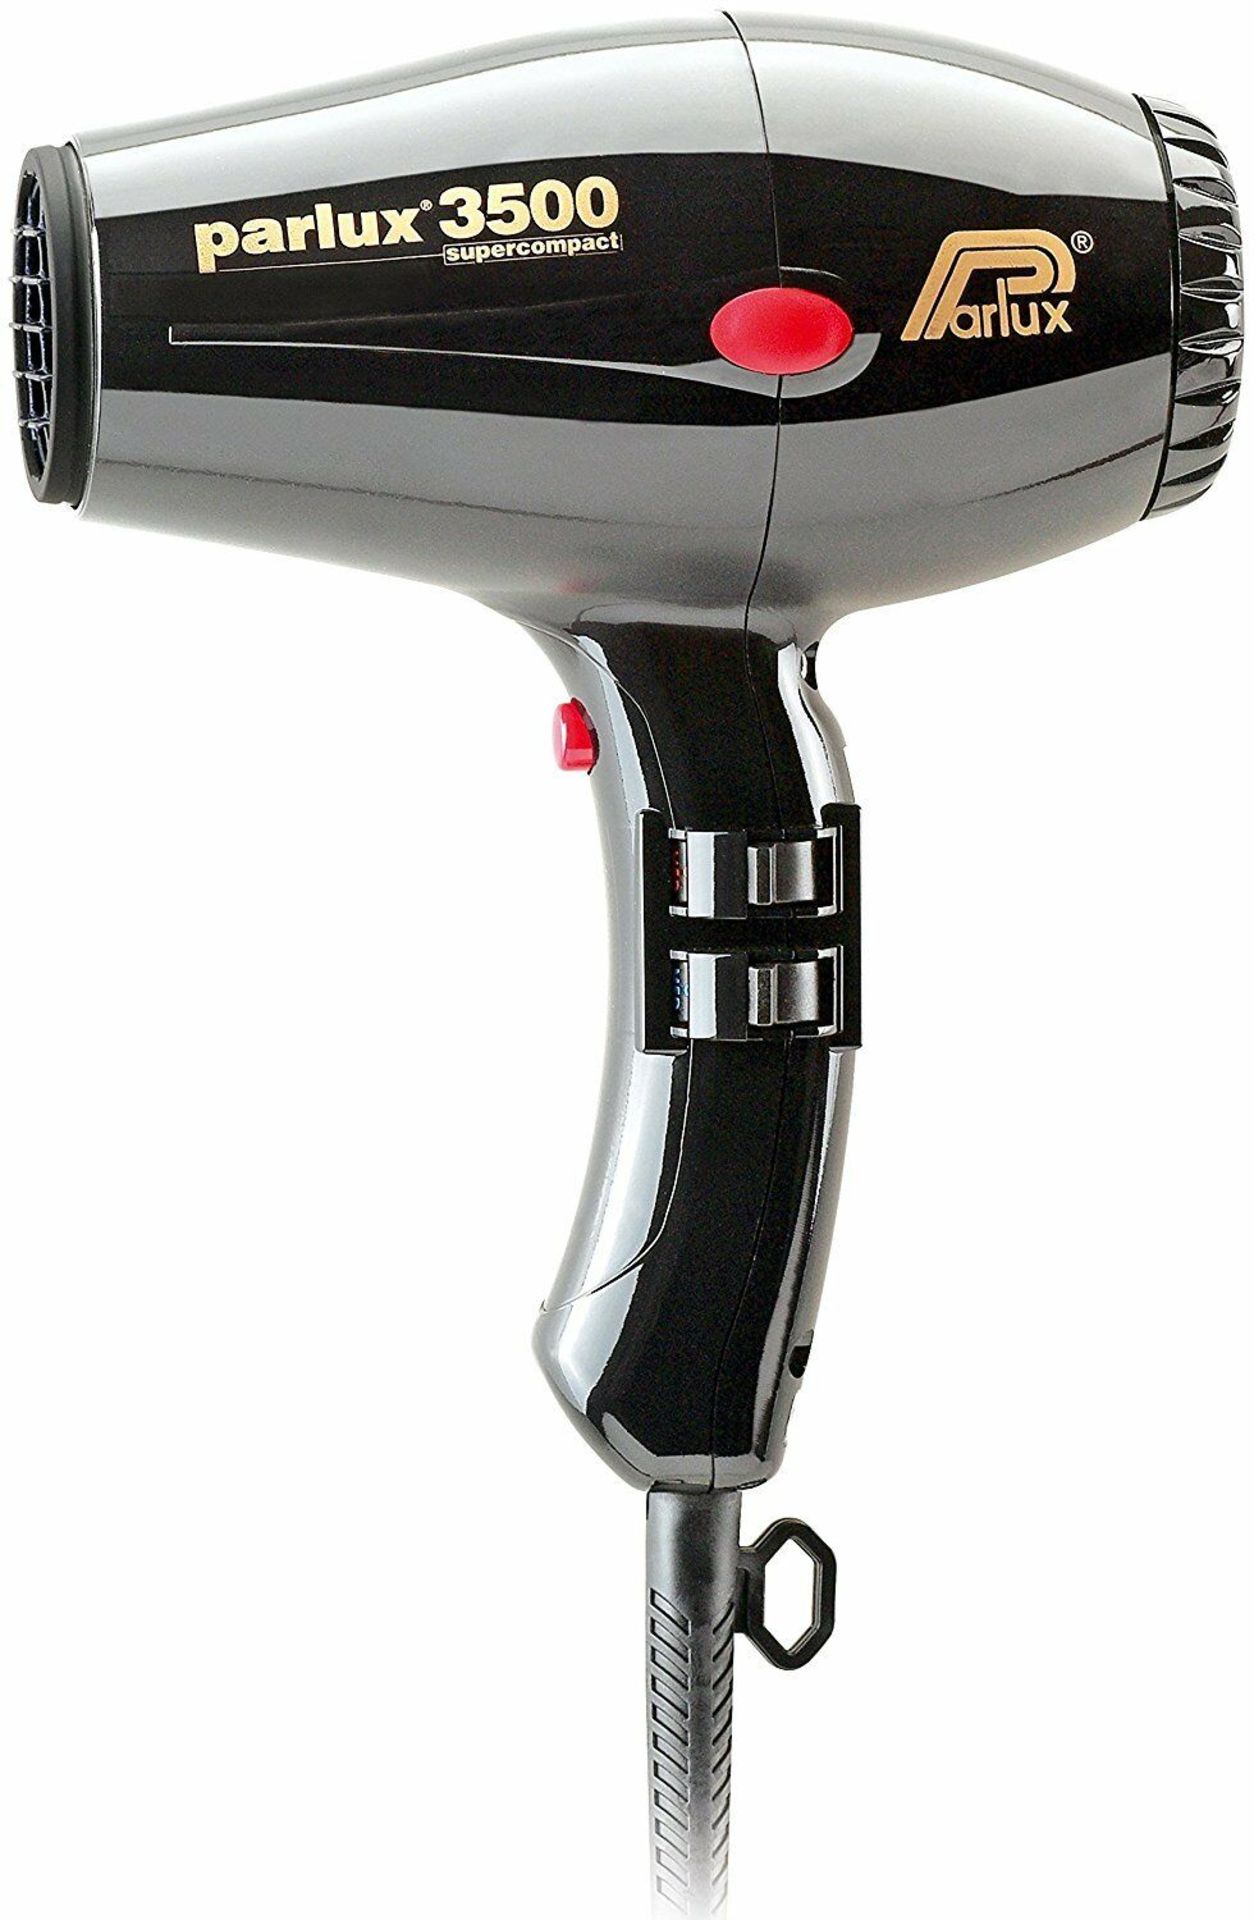 Parlux 3500 Supercompact Hair Dryer Professional Black - Image 5 of 11